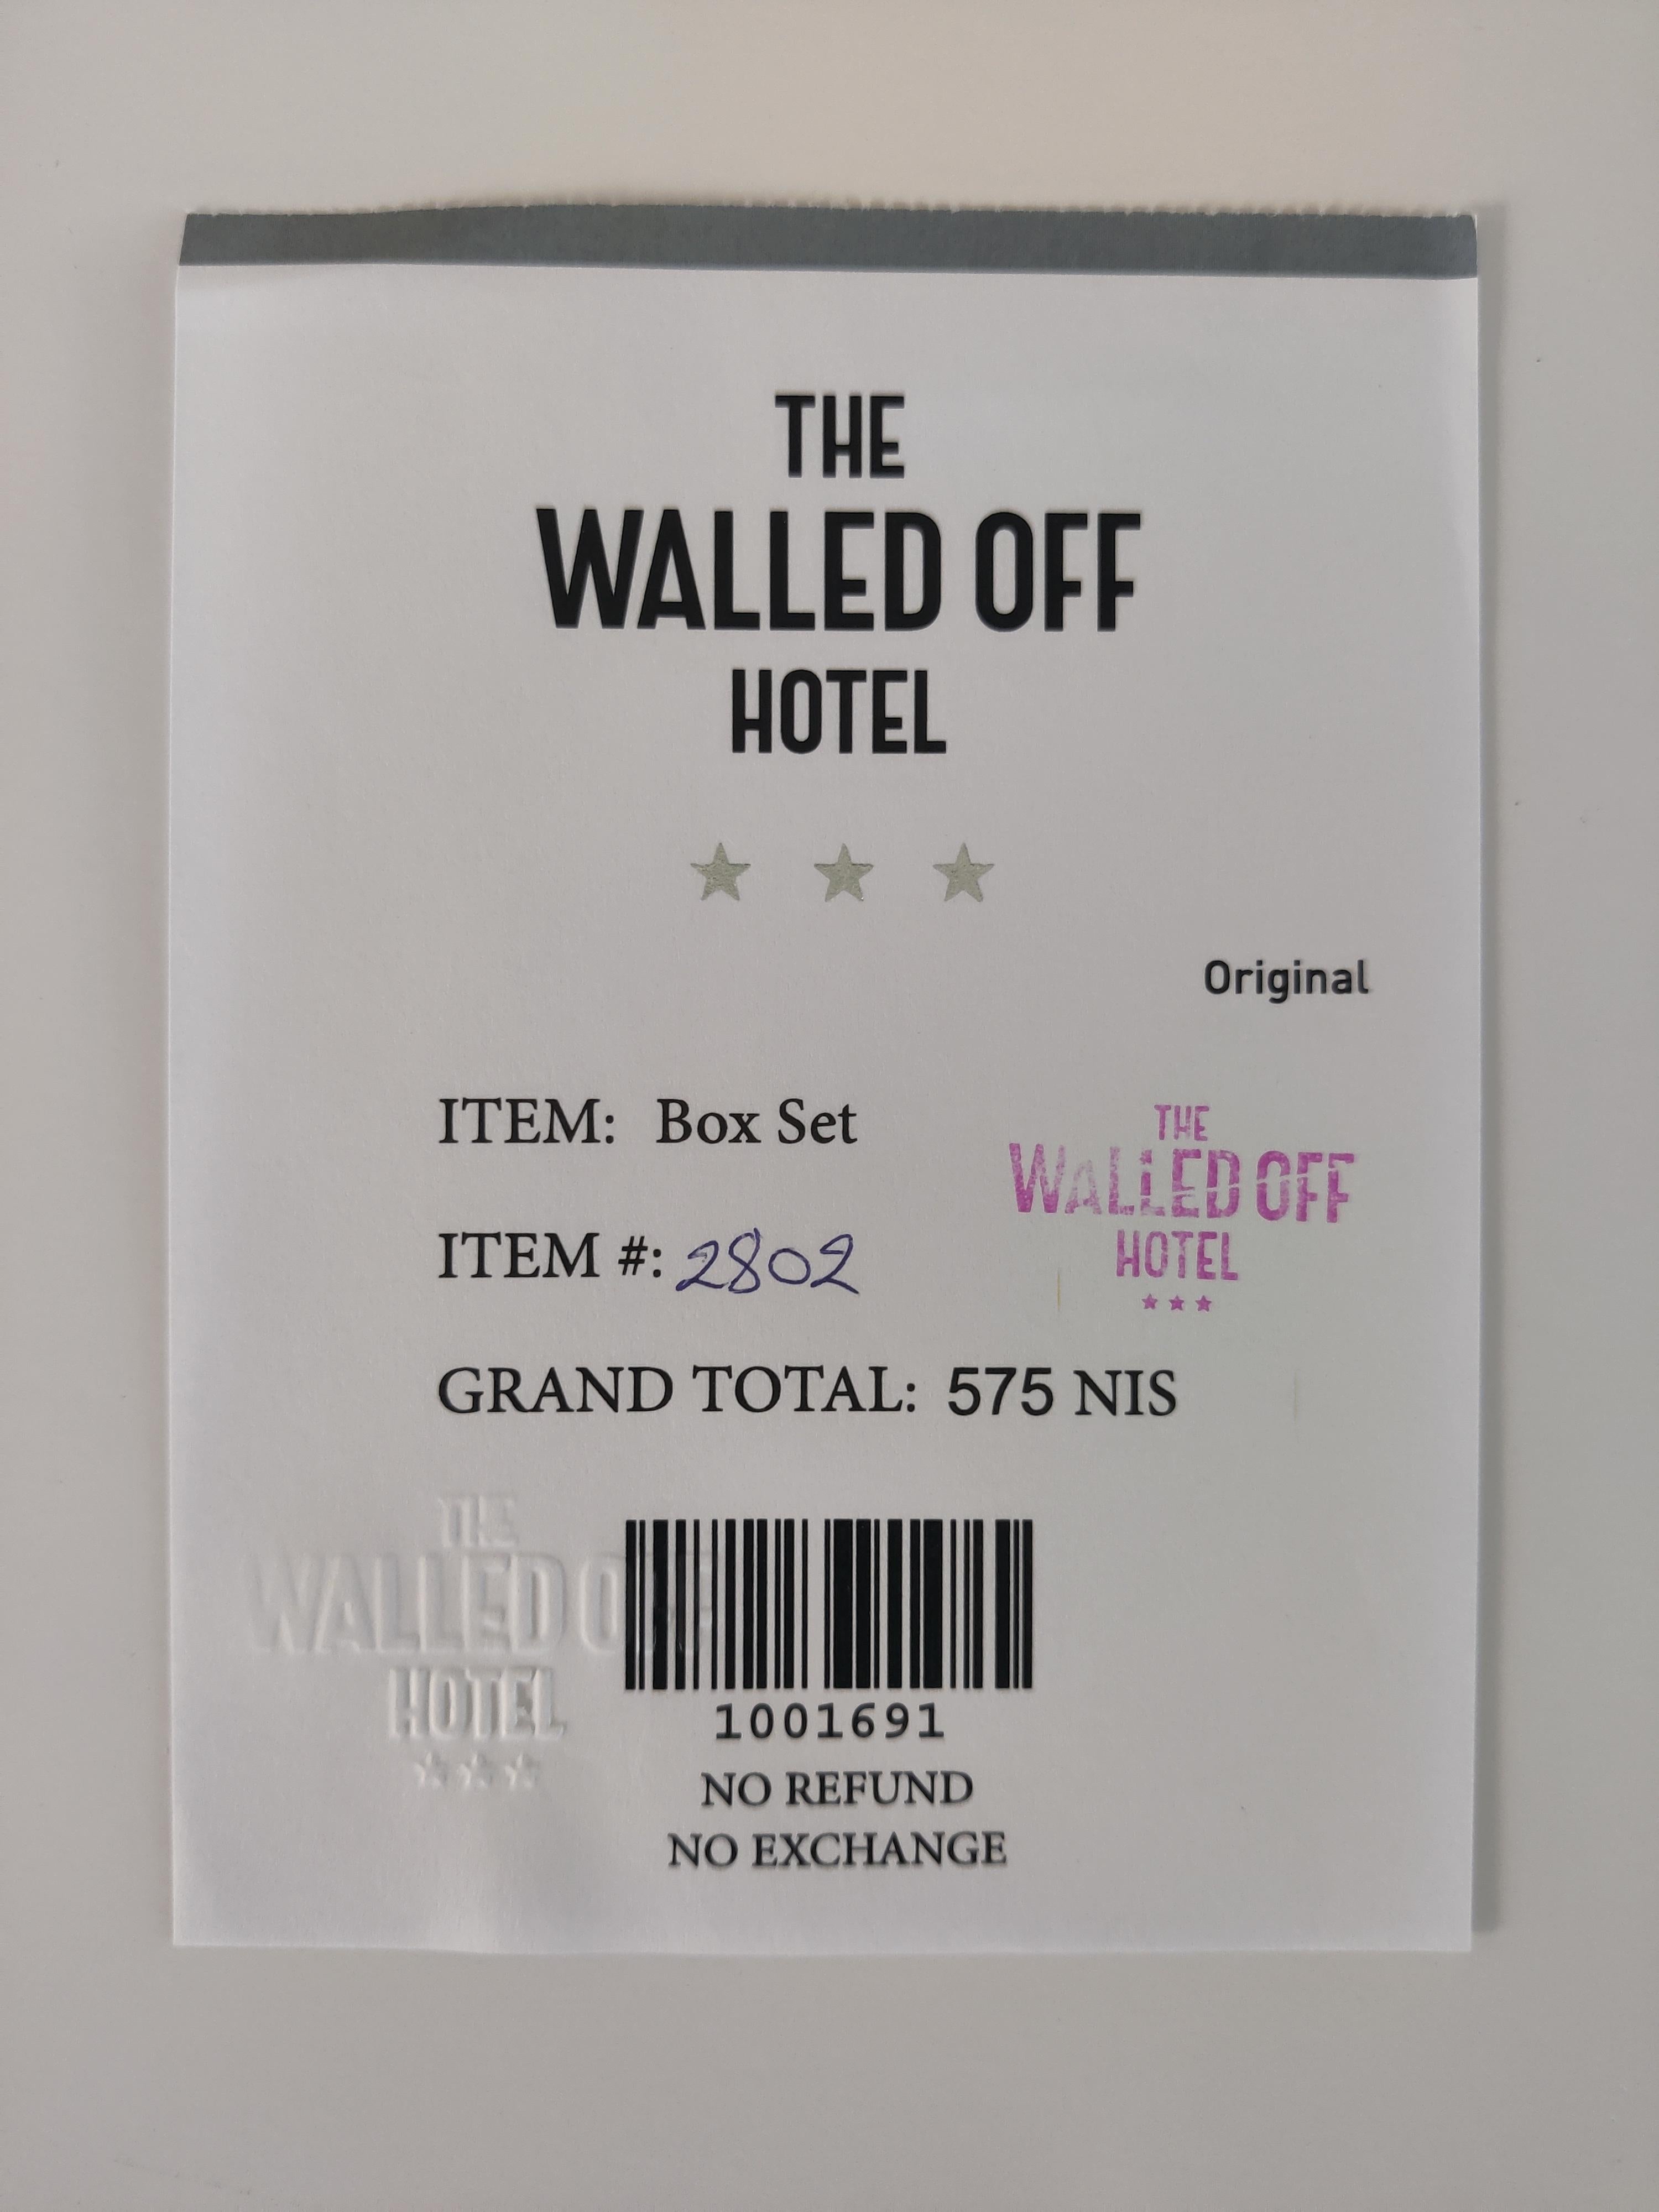 Banksy -- Walled Off Hotel,  Box Set 

From the hotel designed by Banksy. Digital print with concrete wall piece.

Comes with the receipt.

The edition size is unknown. Unsigned by Banksy.

Dimensions: Height: 25 cm, Width: 25 cm, Depth: 4.5 cm